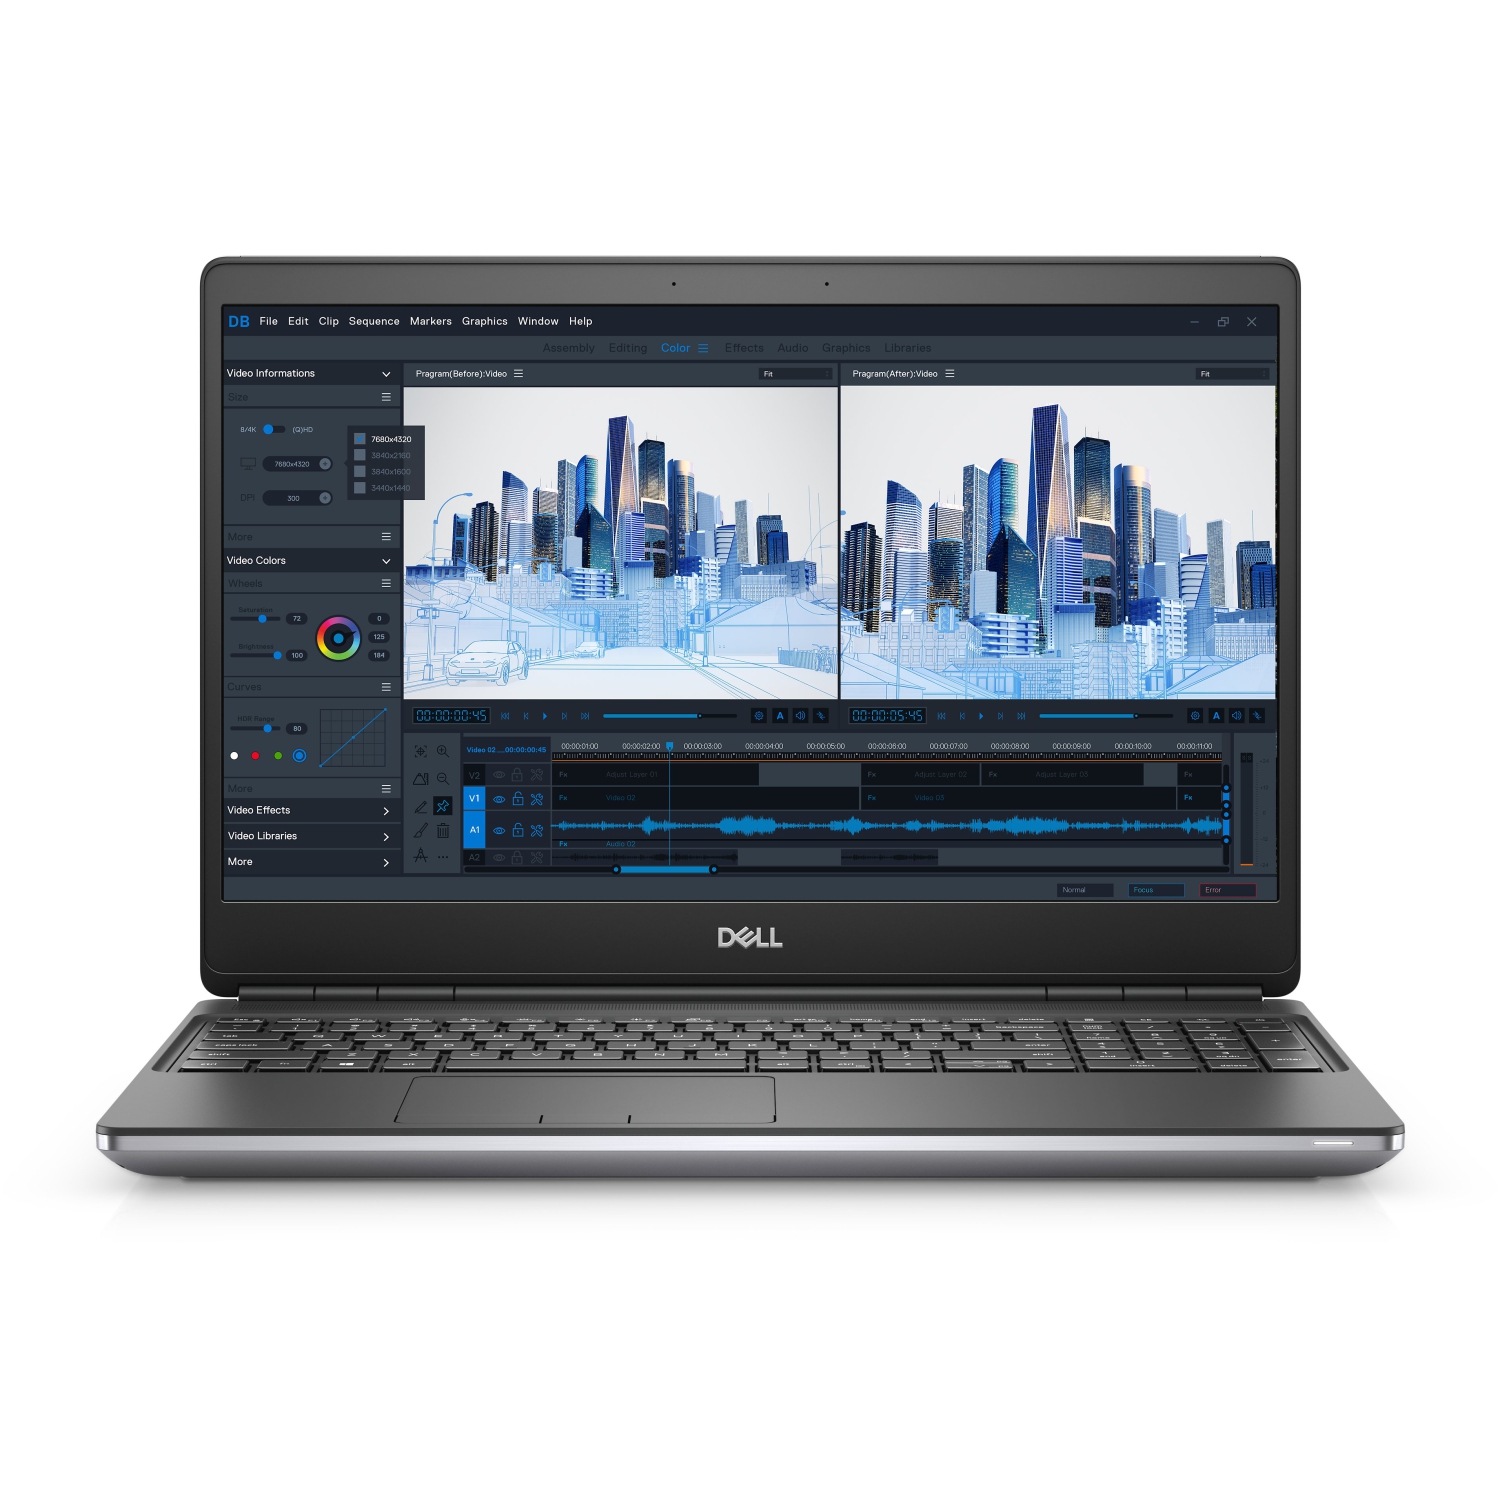 Refurbished (Excellent) - Dell Precision 7000 7560 Workstation Laptop (2021), 15.6" FHD, Core i9, 1TB SSD + 1TB SSD, 64GB RAM, RTX A5000, 5 GHz, 11th Gen CPU Certified